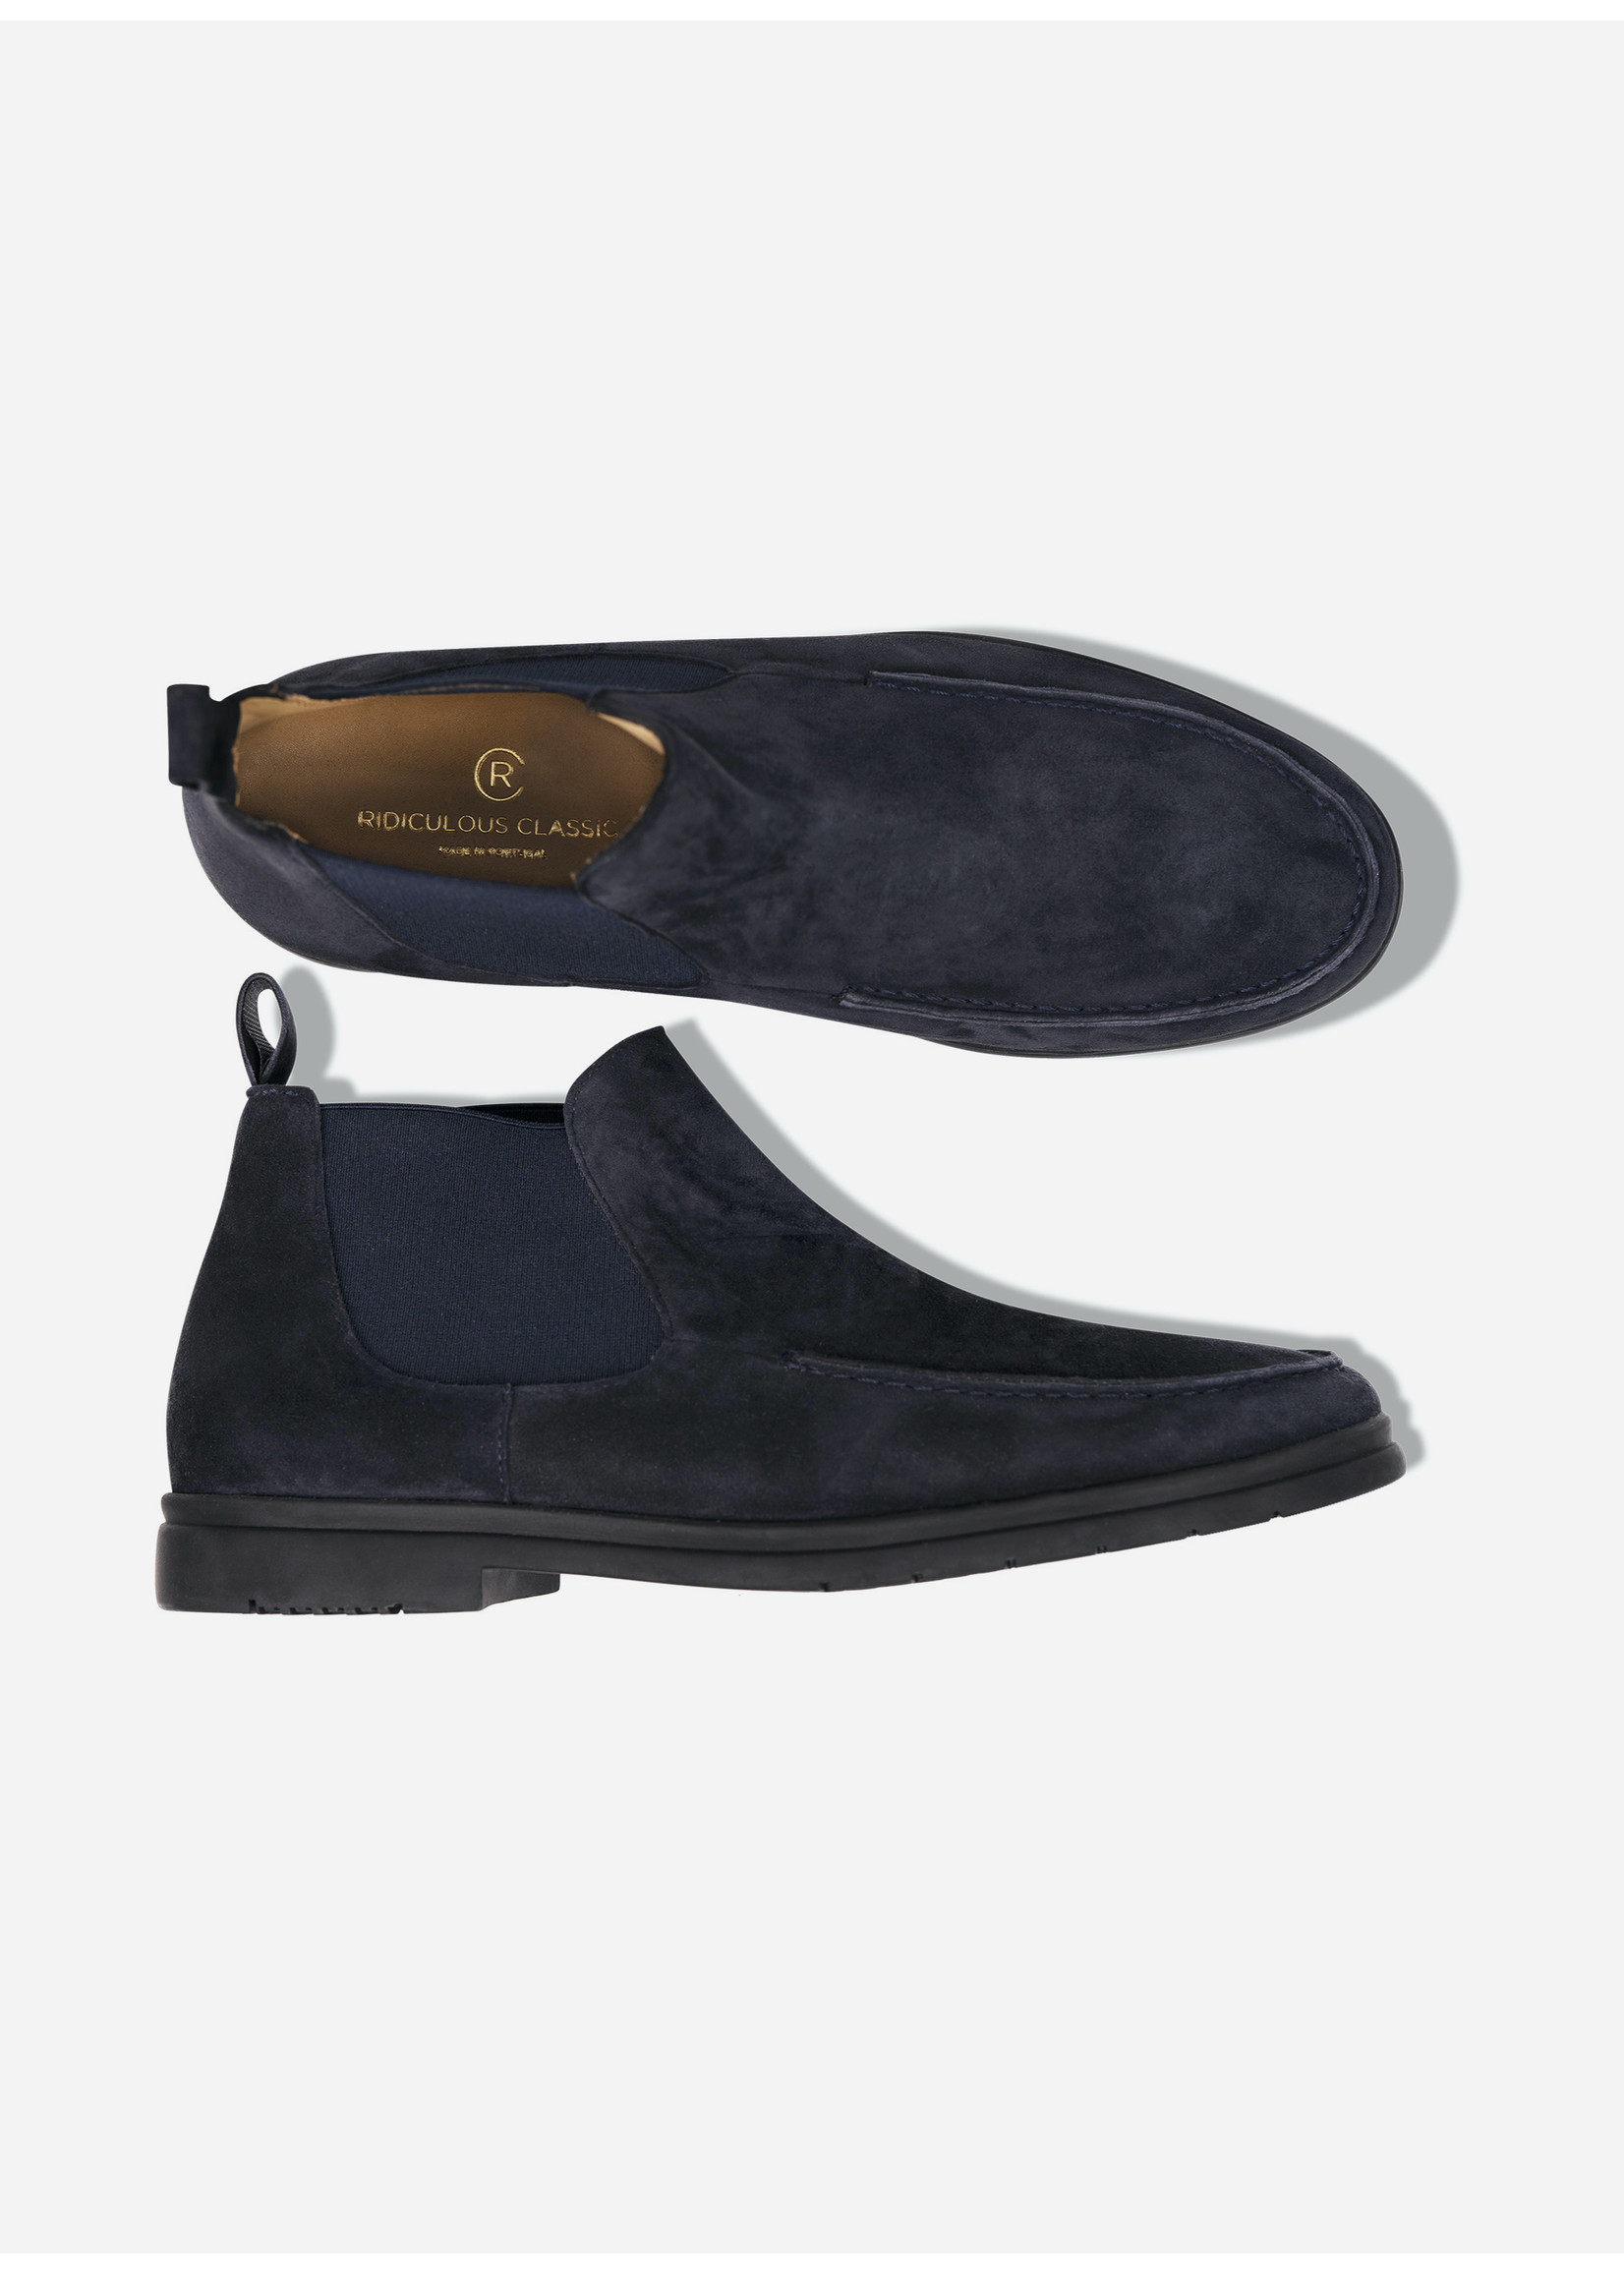 Ridiculous Classic Chelsea Mid Deep Navy